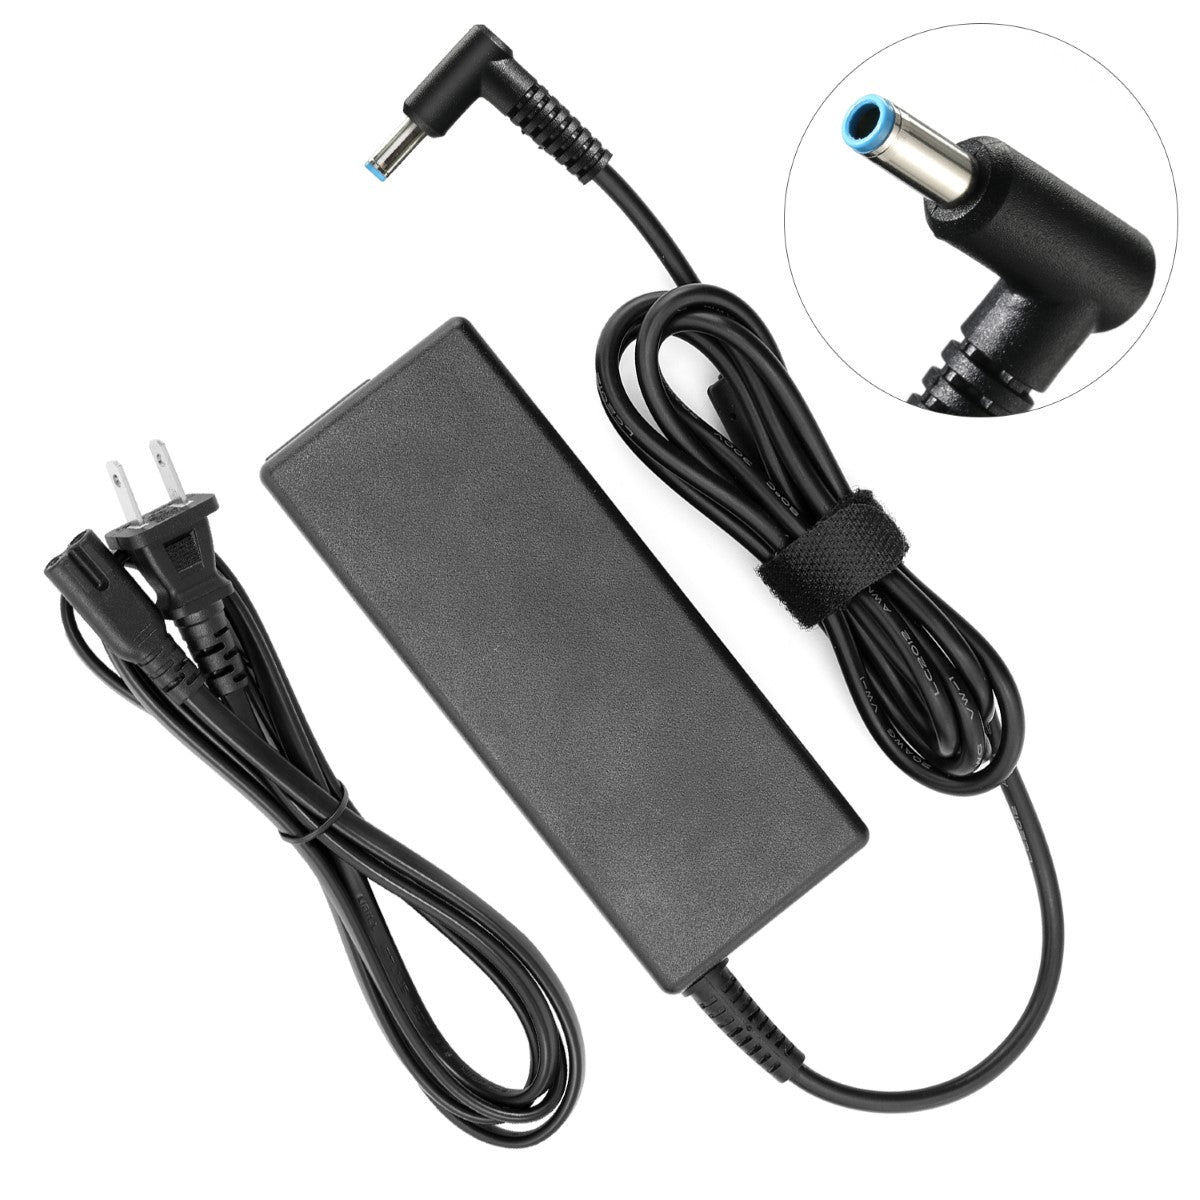 AC Adapter Charger for HP Pavilion 11-h010ca x2 Notebook.